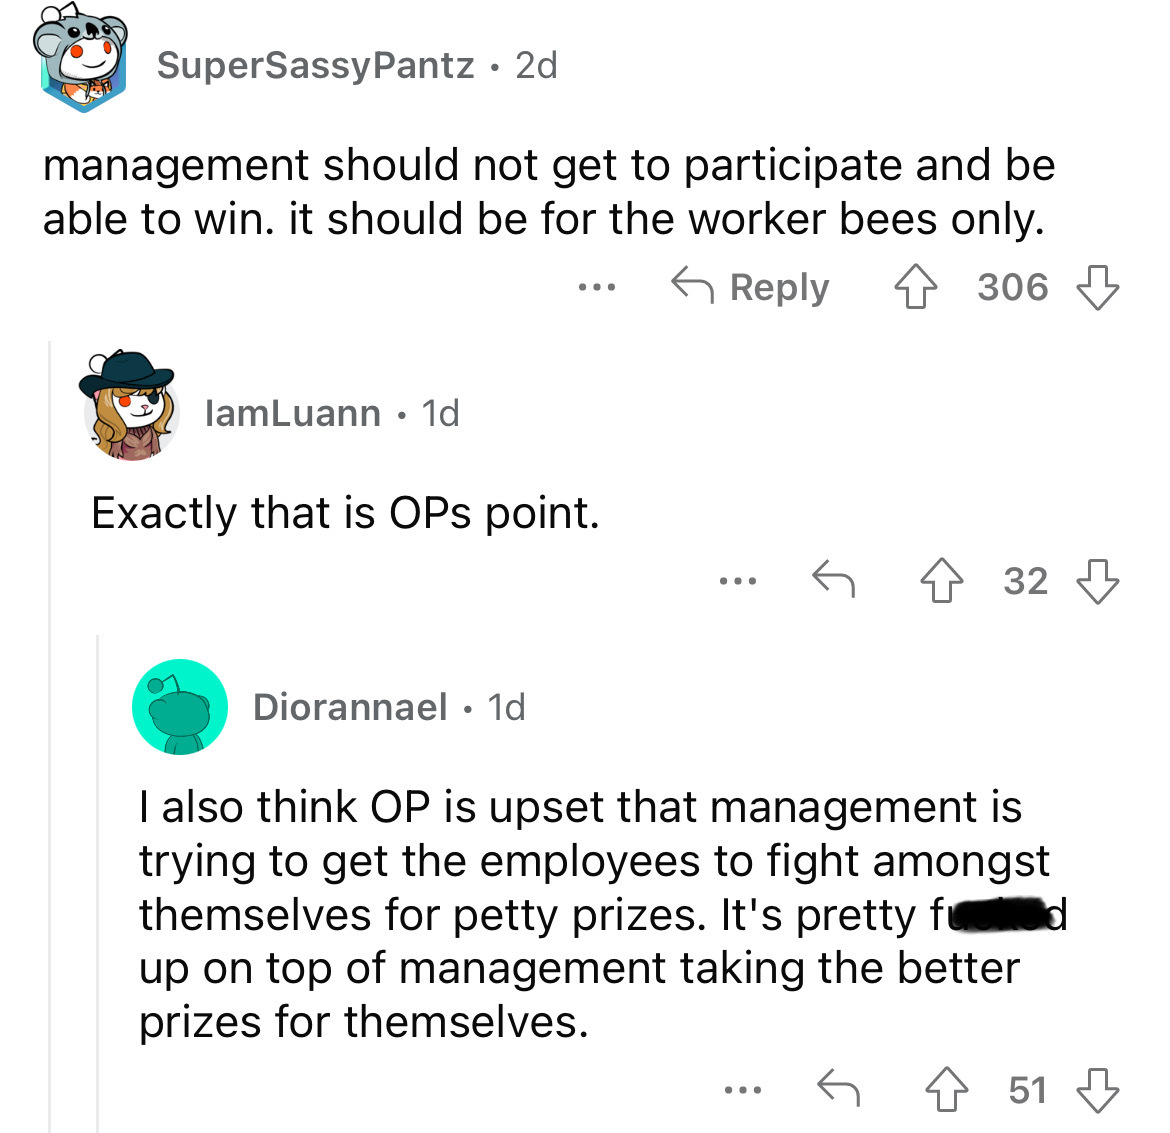 angle - SuperSassy Pantz 2d management should not get to participate and be able to win. it should be for the worker bees only. 4306 lamLuann. 1d ... Exactly that is OPs point. Diorannael. 1d 432 I also think Op is upset that management is trying to get t